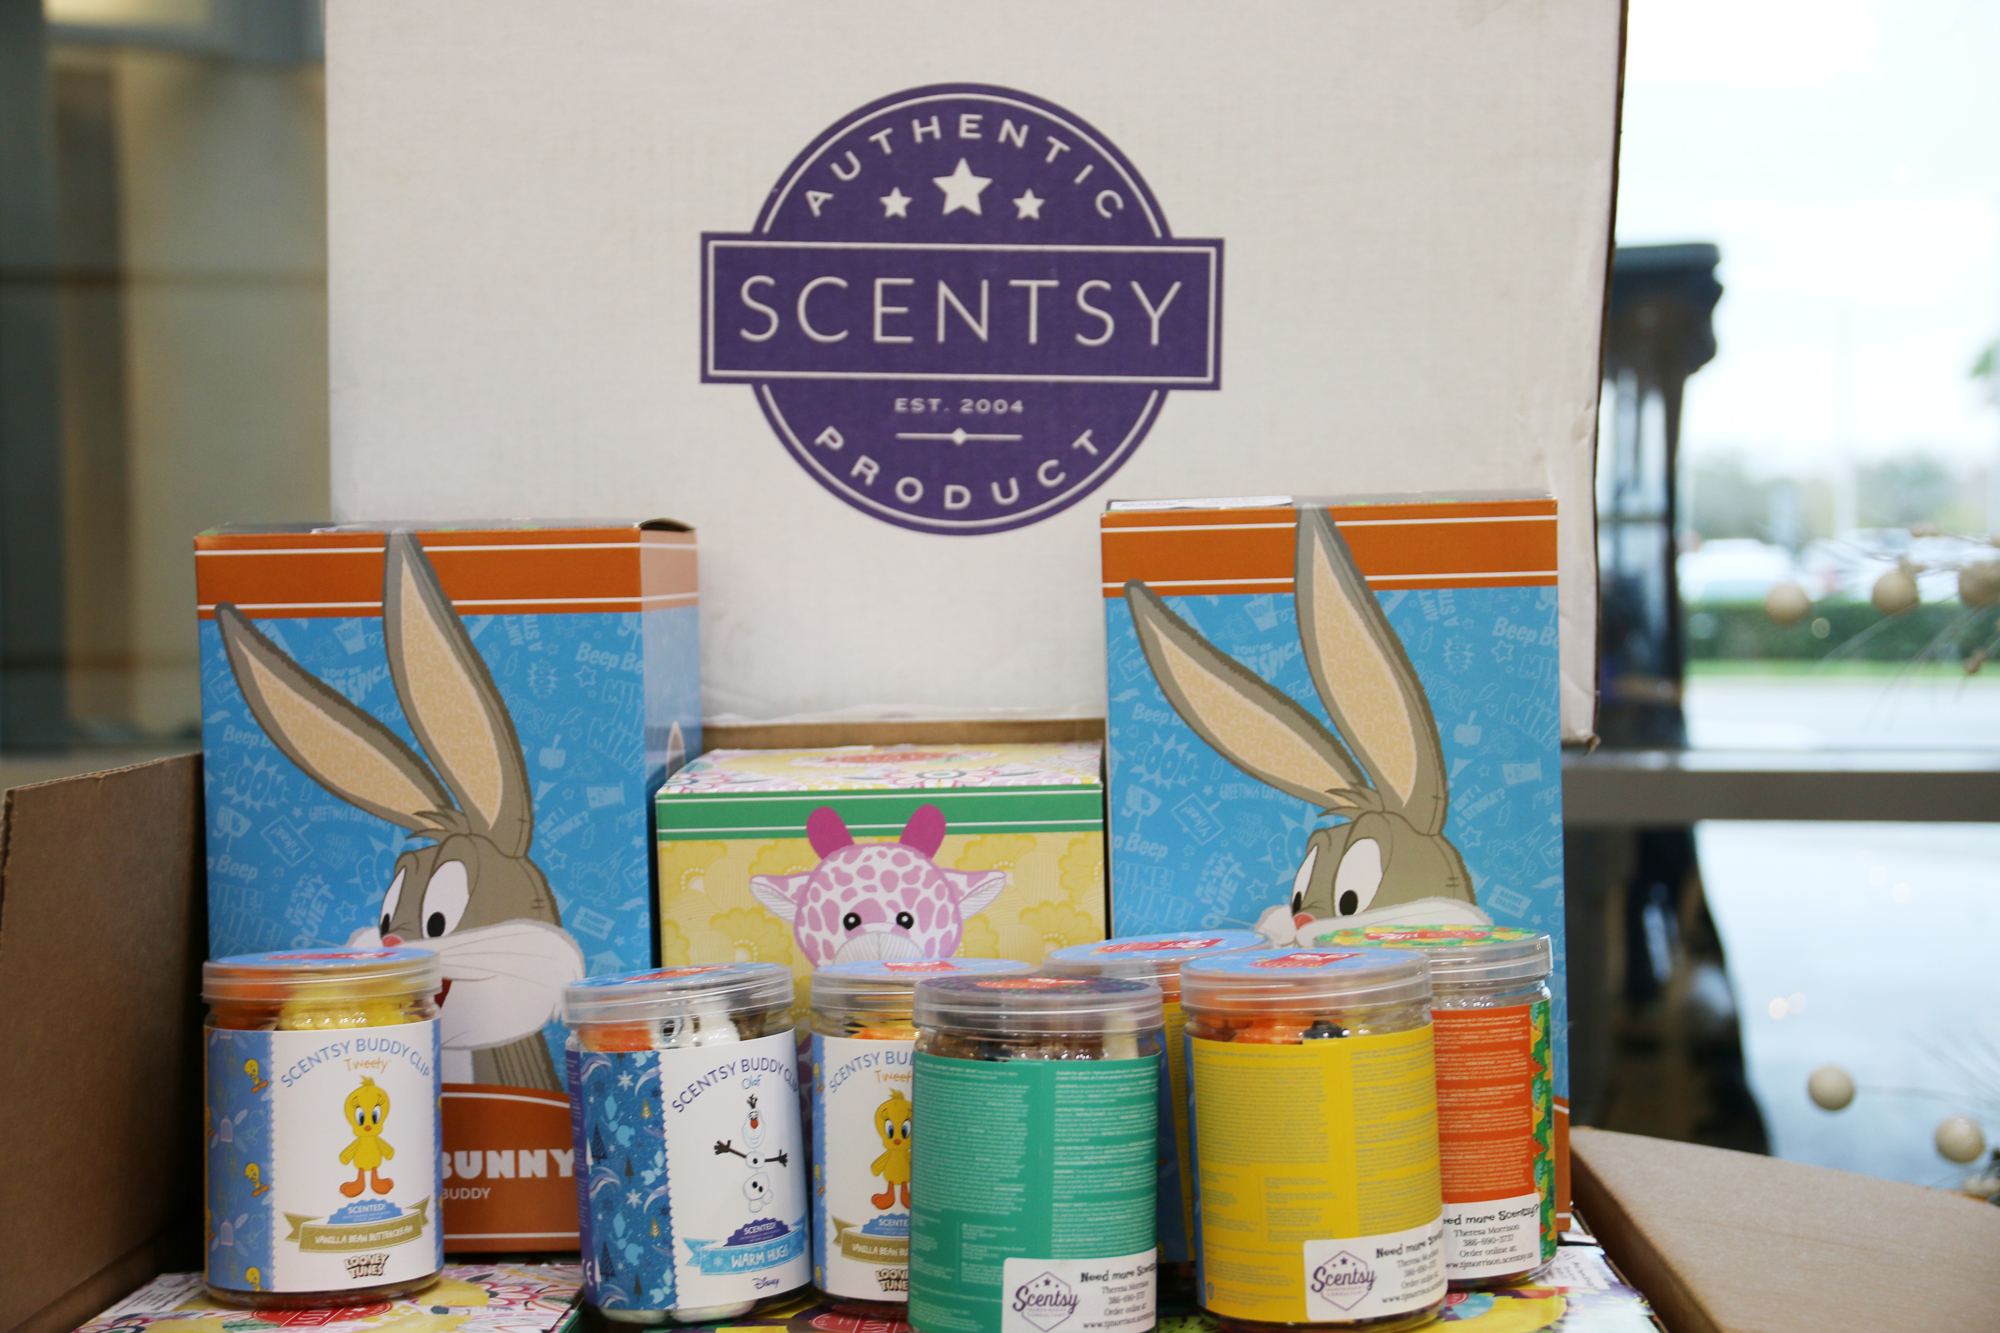 Camila Forester and Theresa Morrison donated about 250 Scentsy Buddies to AdventHealth Daytona Beach on Monday, Dec. 20. Photo by Jarleene Almenass